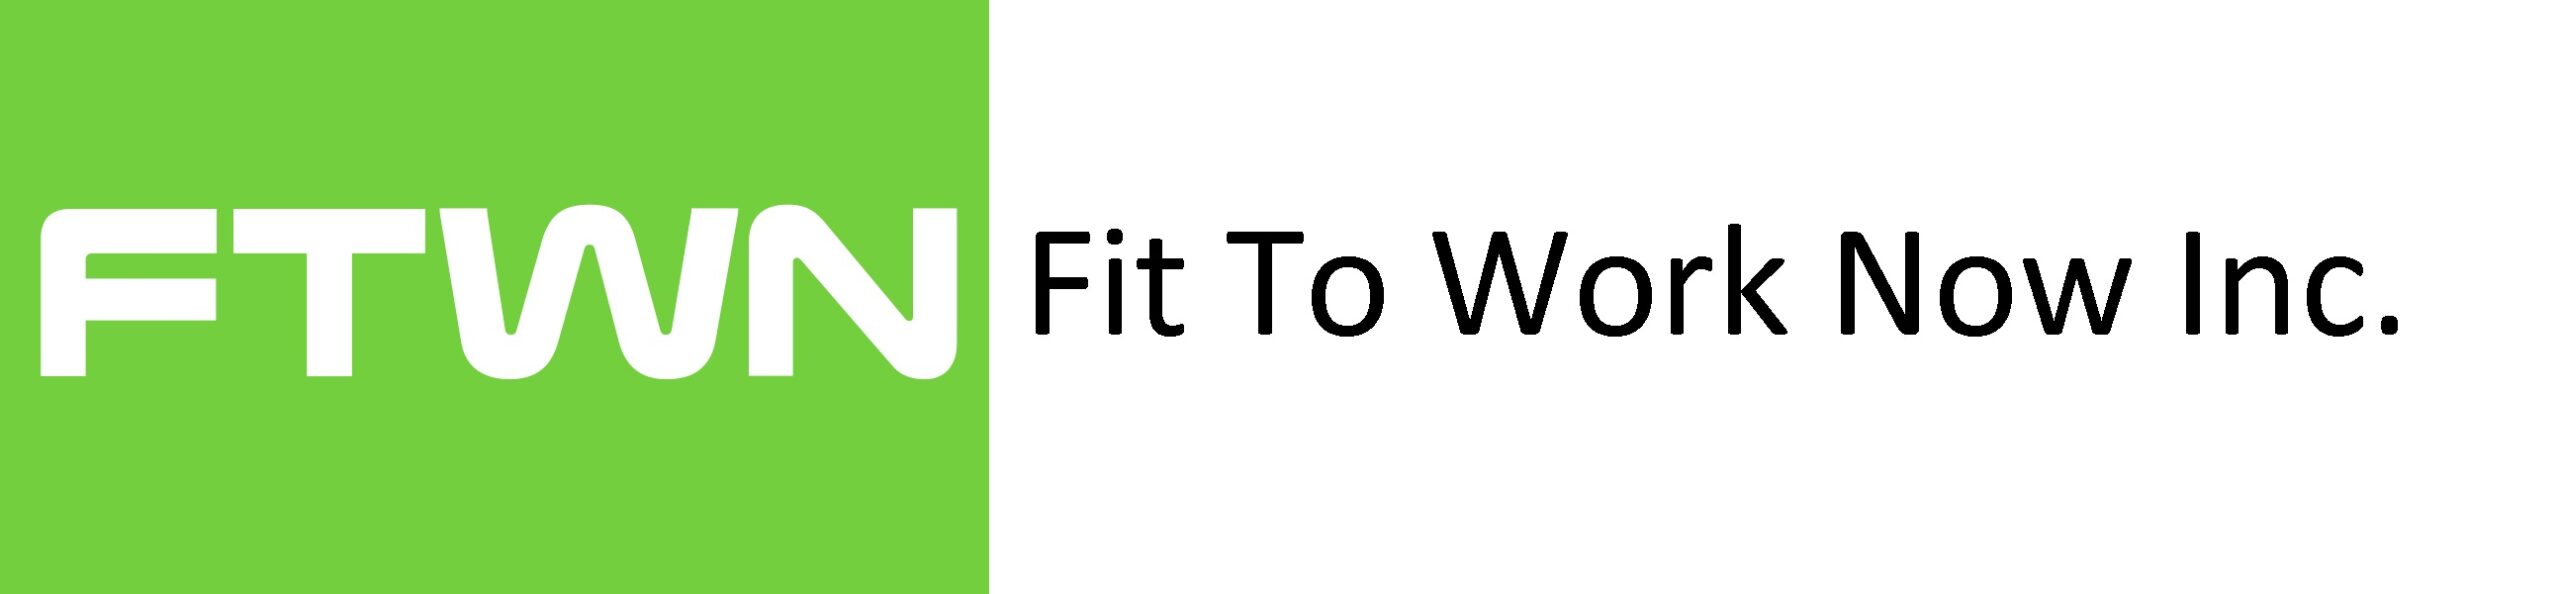 Fit to Work Now Inc